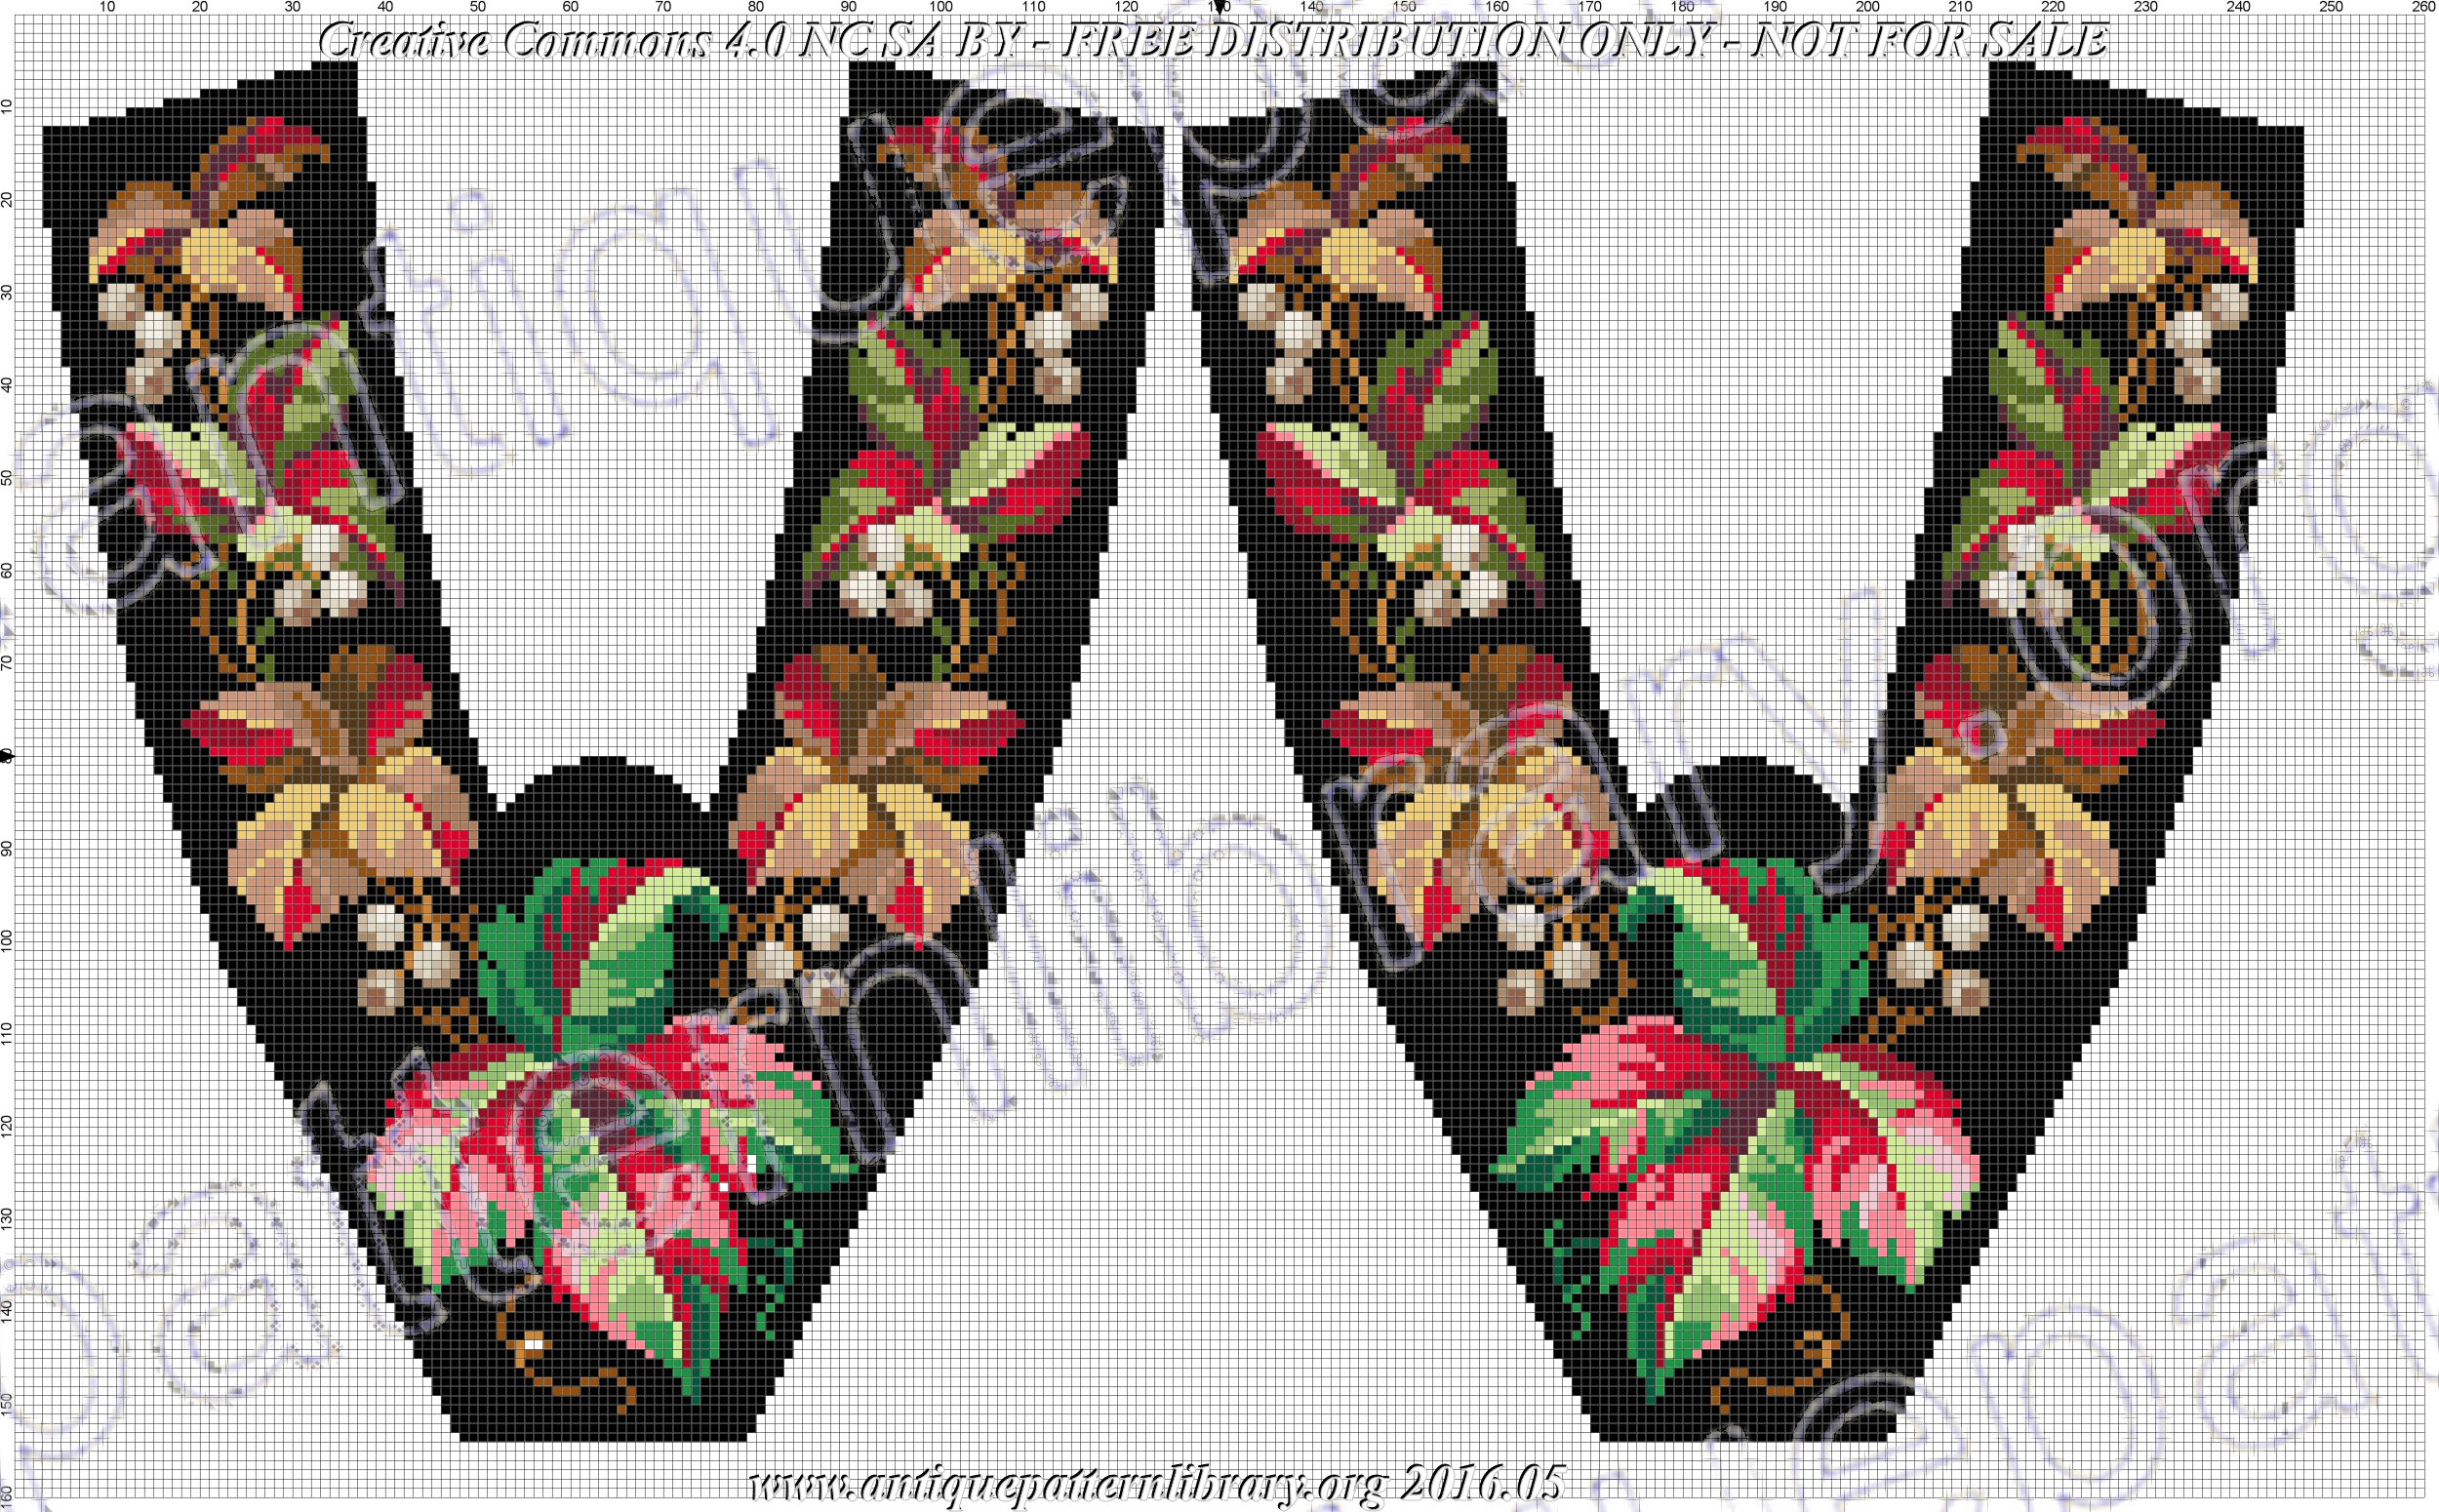 G-SB001 Slipper pattern with autumn leaves